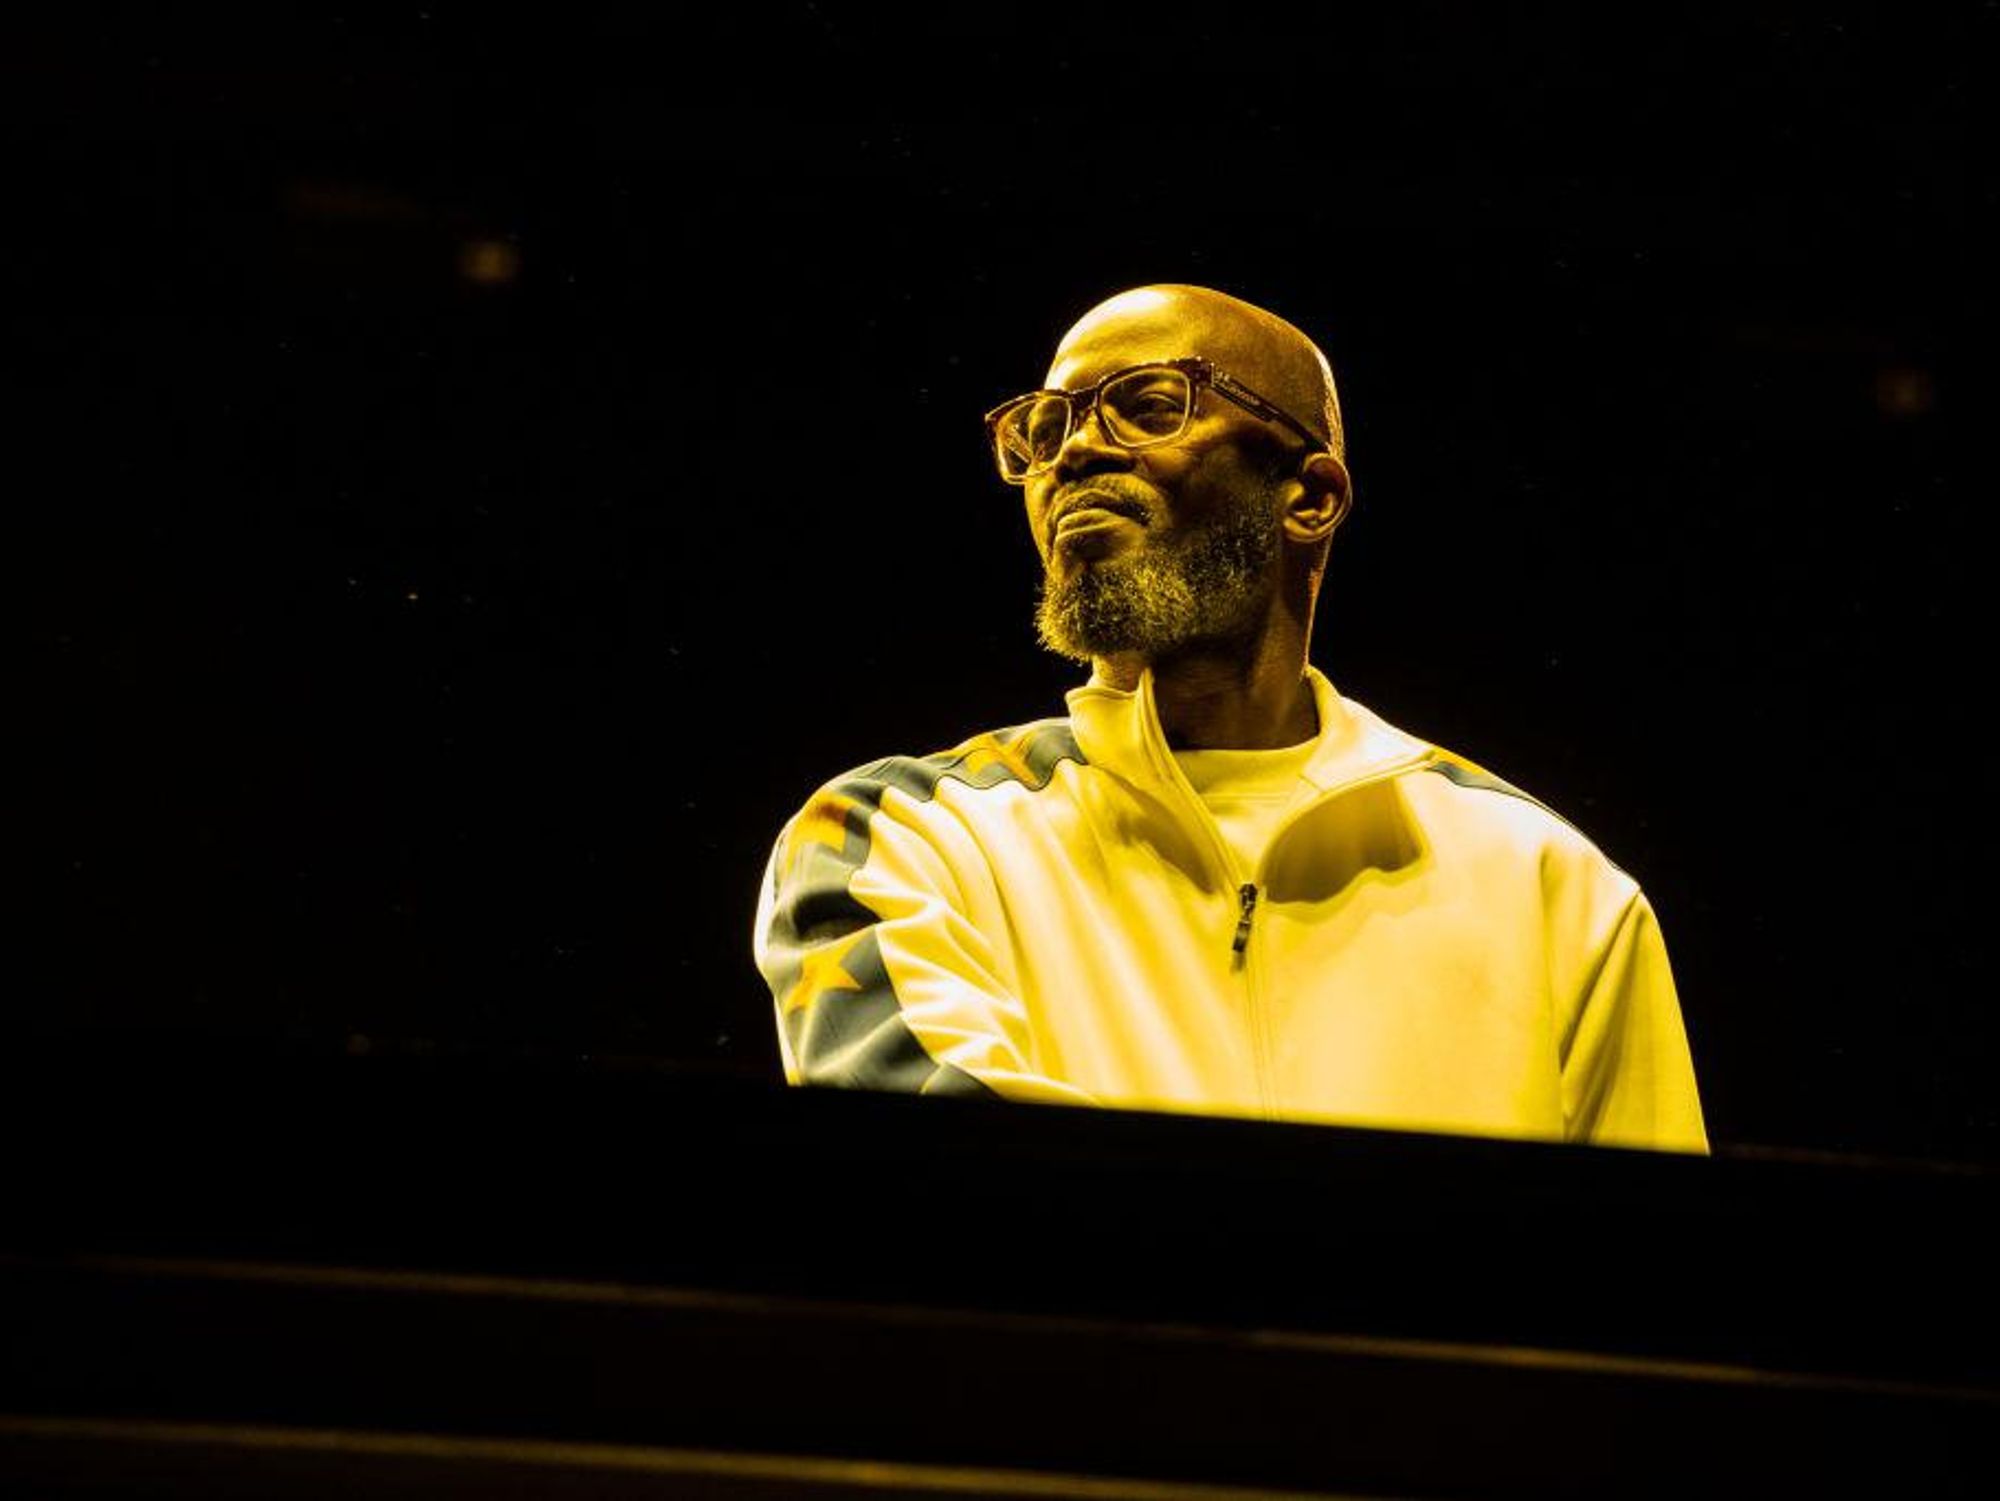 Black Coffee & Tresor’s Work On Drake’s New Album Speaks to the Rise of South African Music